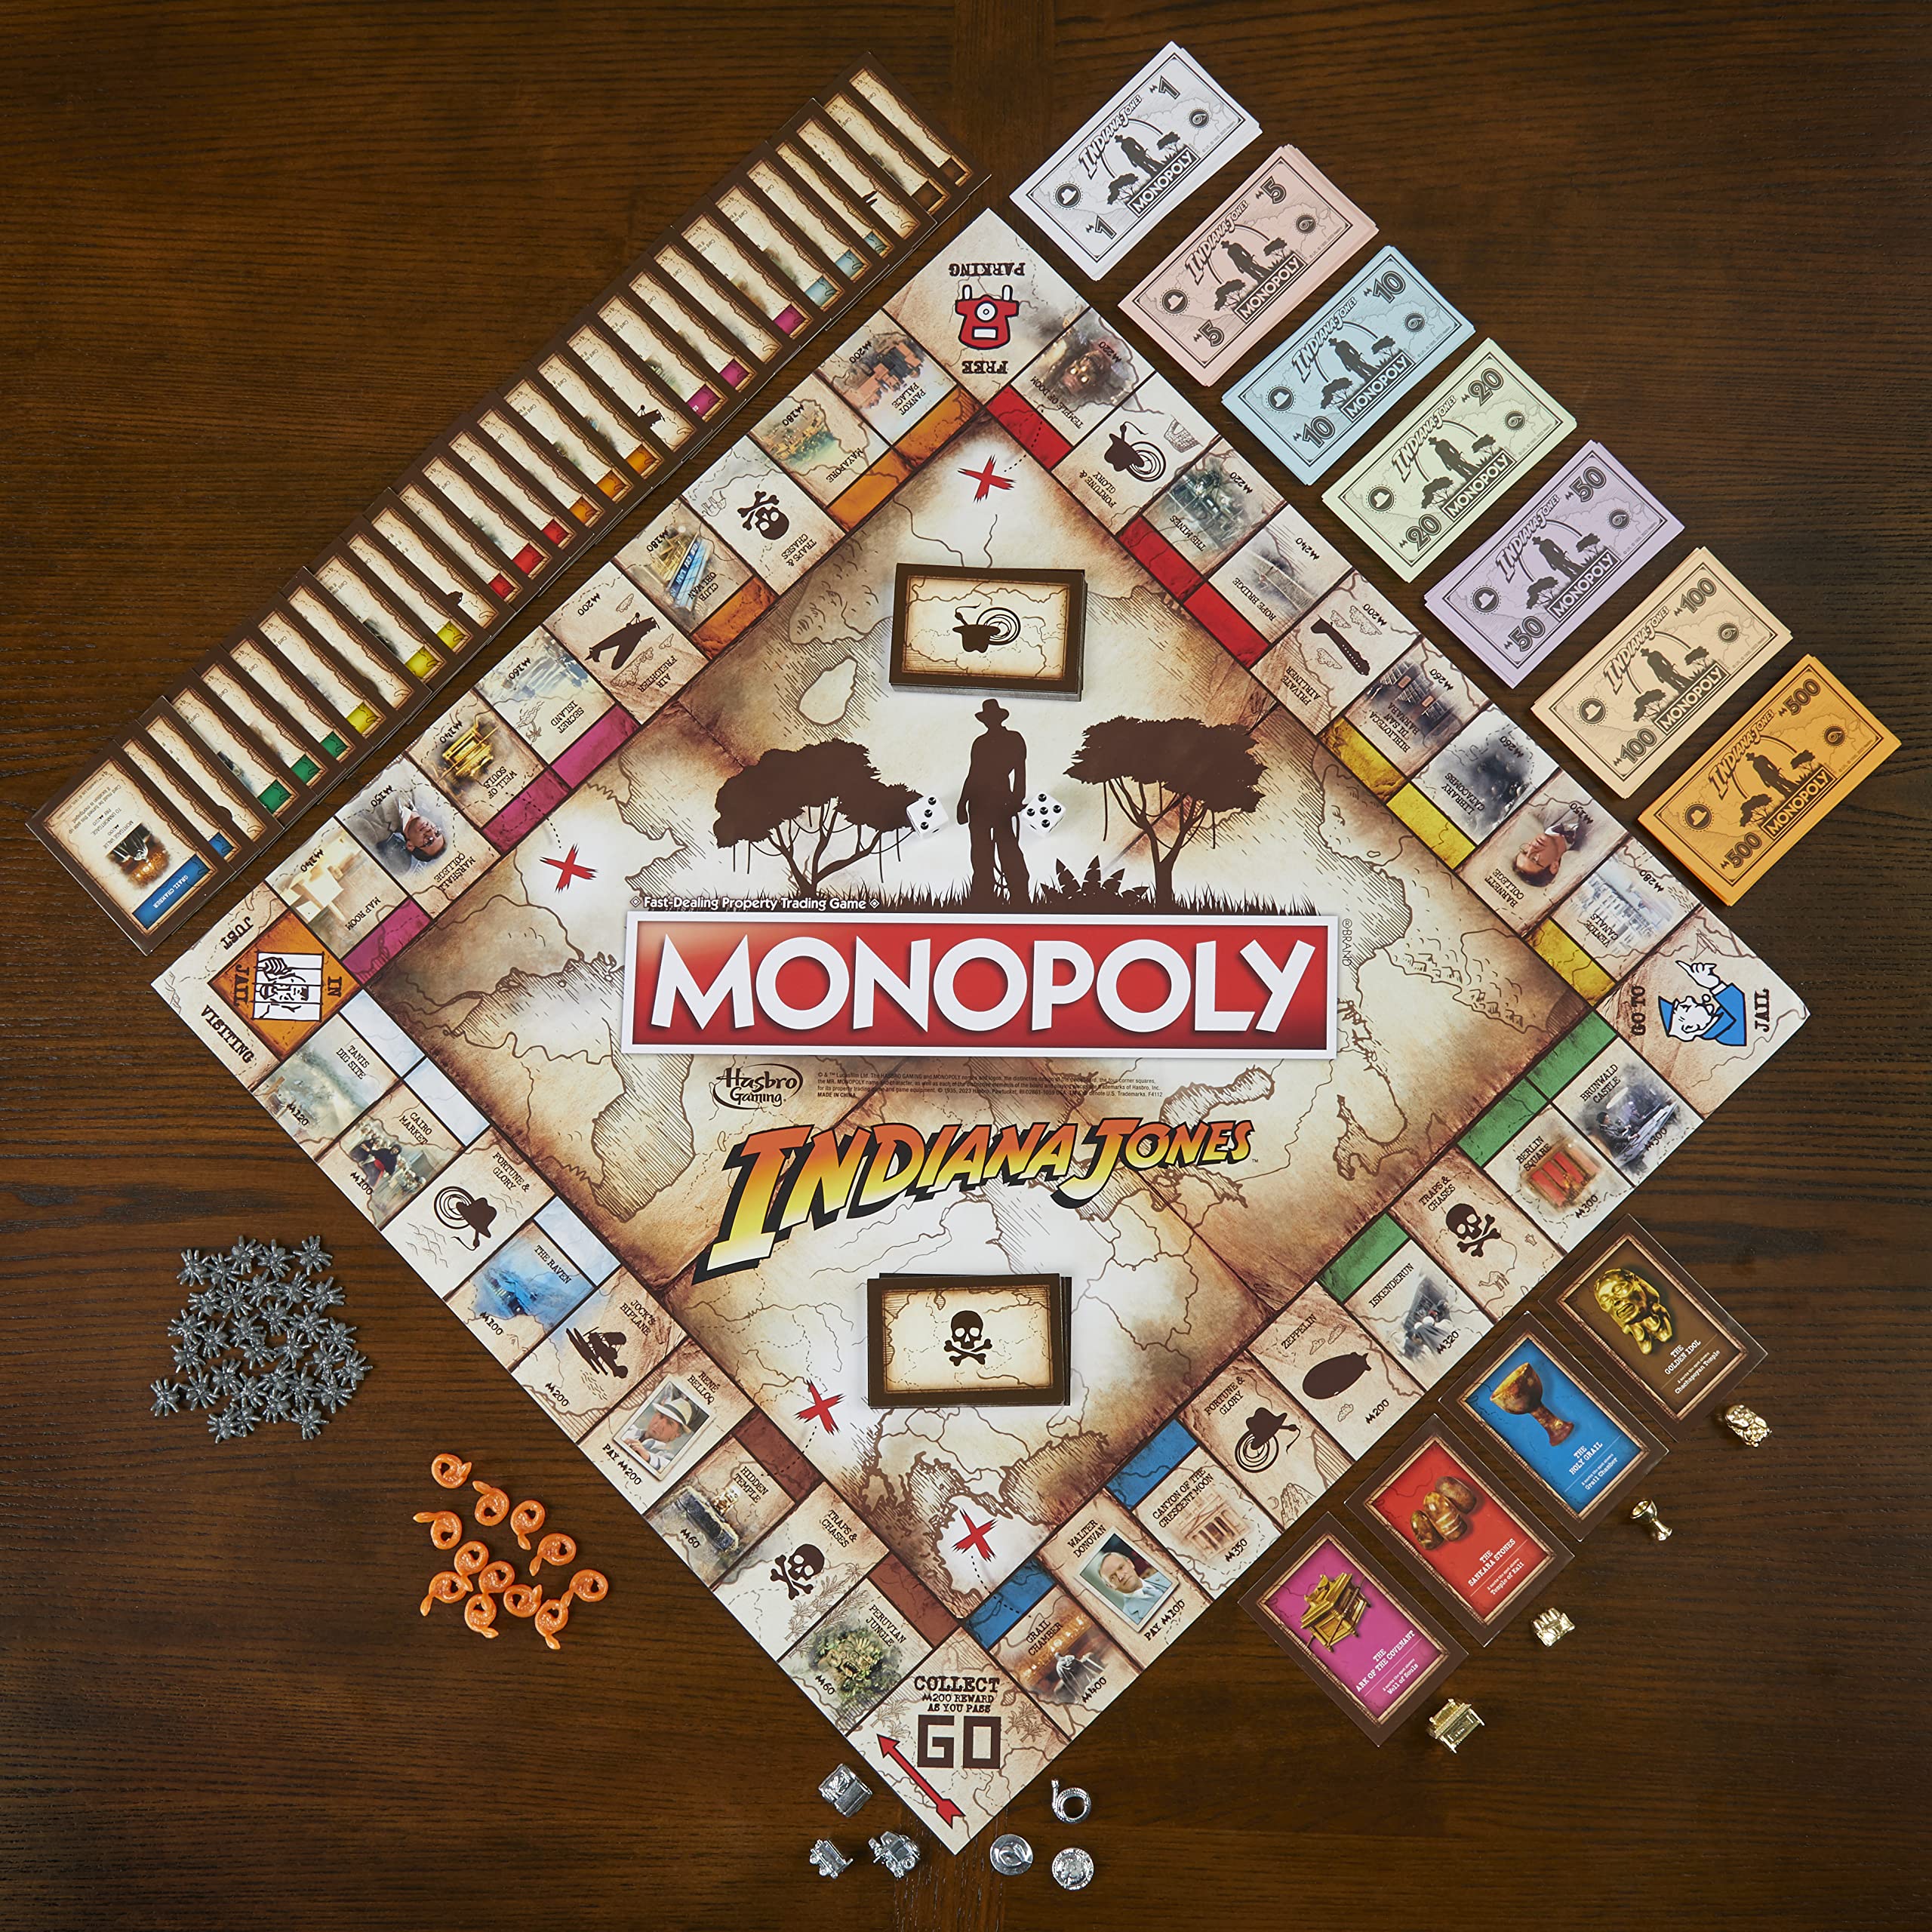 Hasbro Gaming Monopoly Indiana Jones Game,Inspired by The Indiana Jones Movies,Board Game for 2-6 Players,for Kids Ages 8 and Up